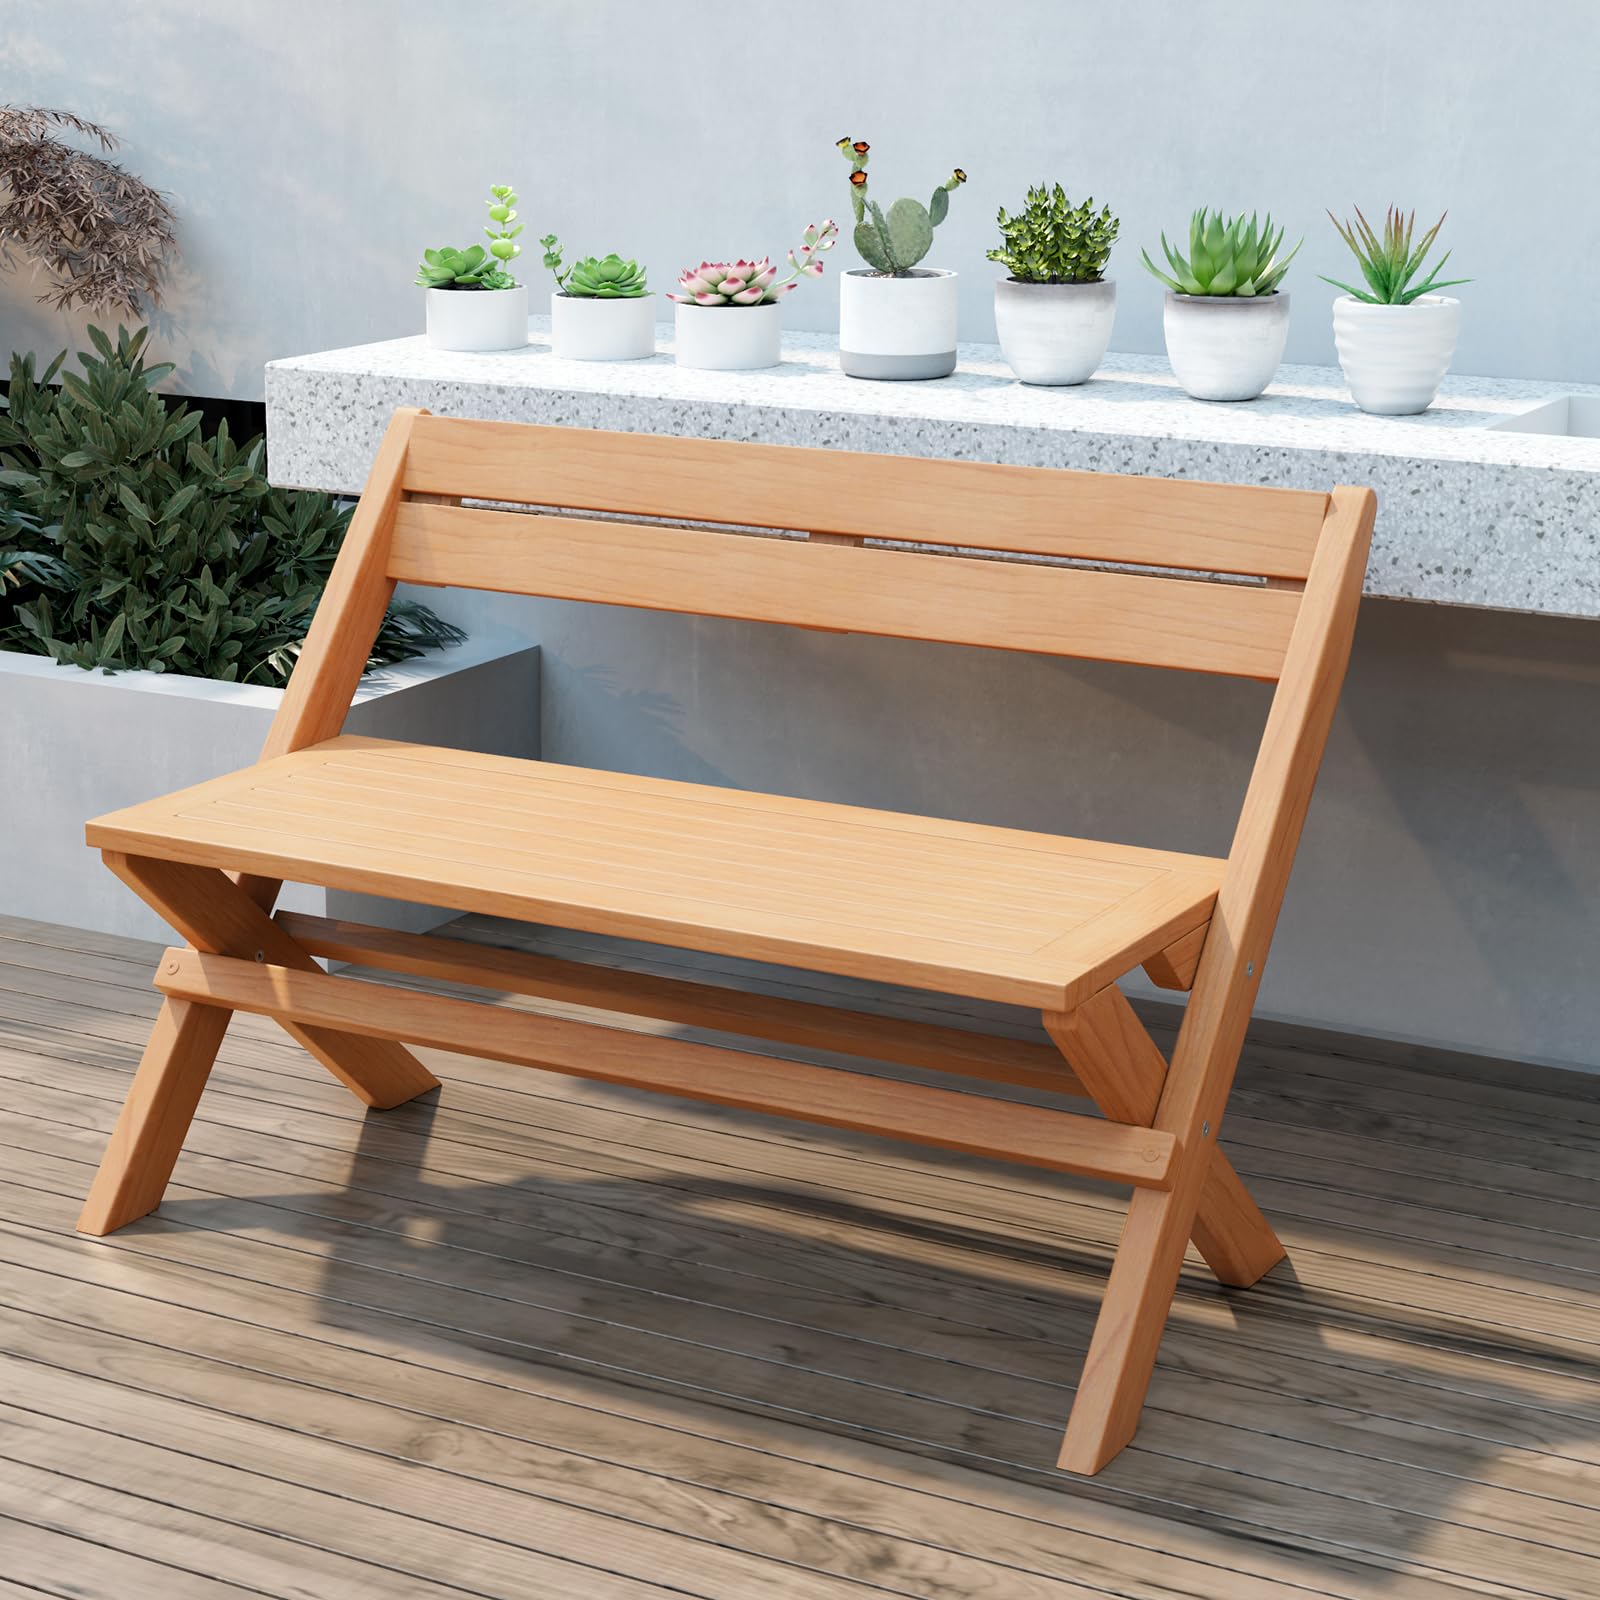 Giantex Wood Outdoor Bench Folding - 2-Person Patio Garden Bench with Solid Teak Wood Structure